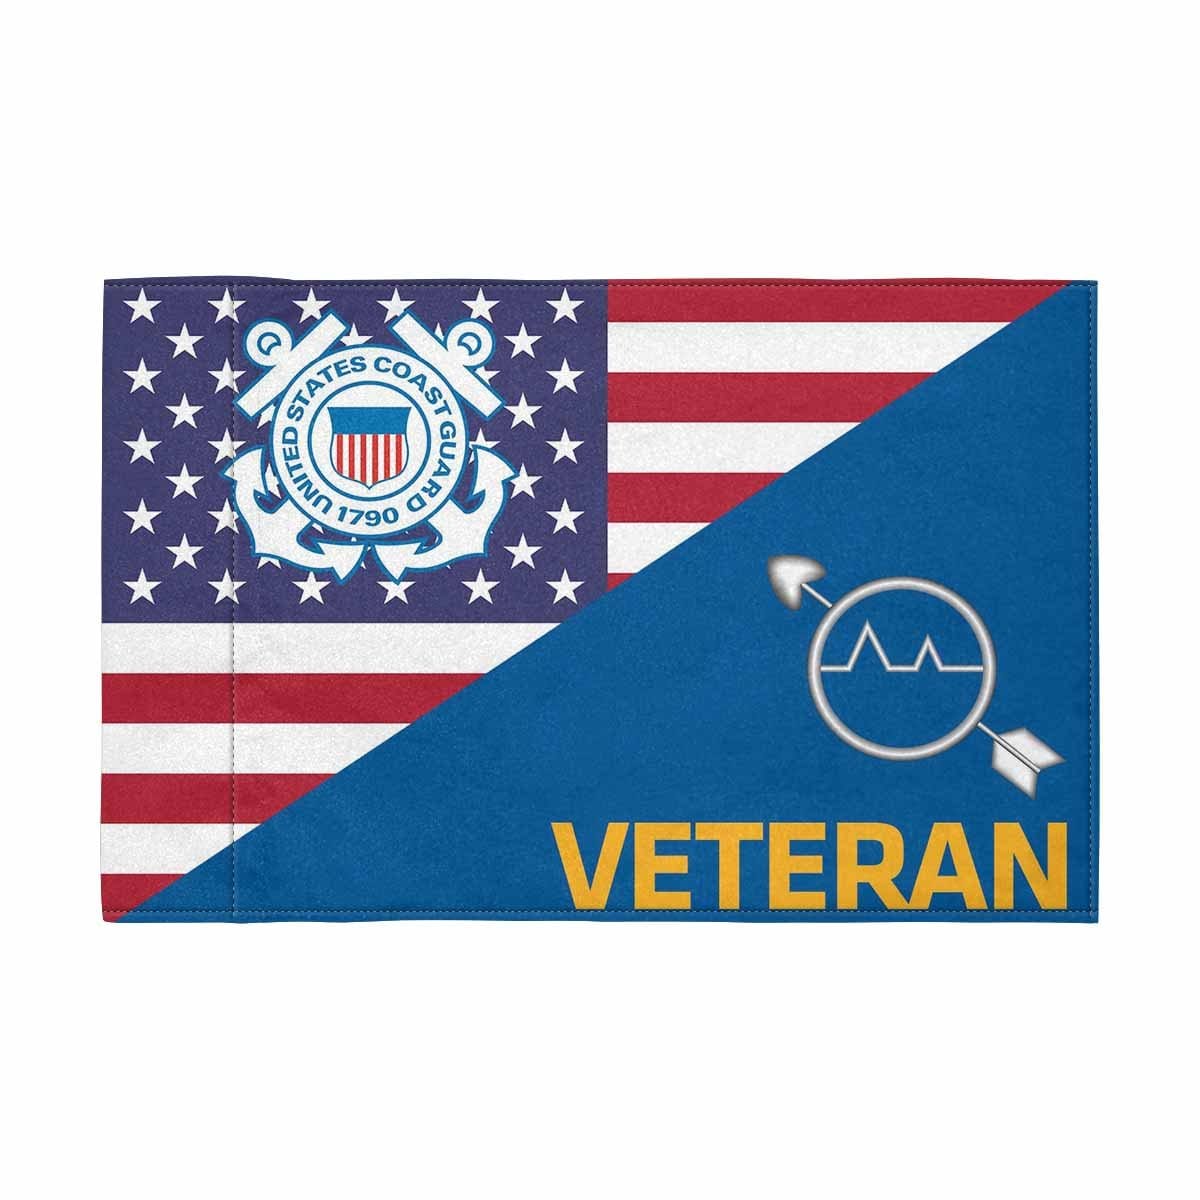 USCG OS Veteran Motorcycle Flag 9" x 6" Twin-Side Printing D01-MotorcycleFlag-USCG-Veterans Nation